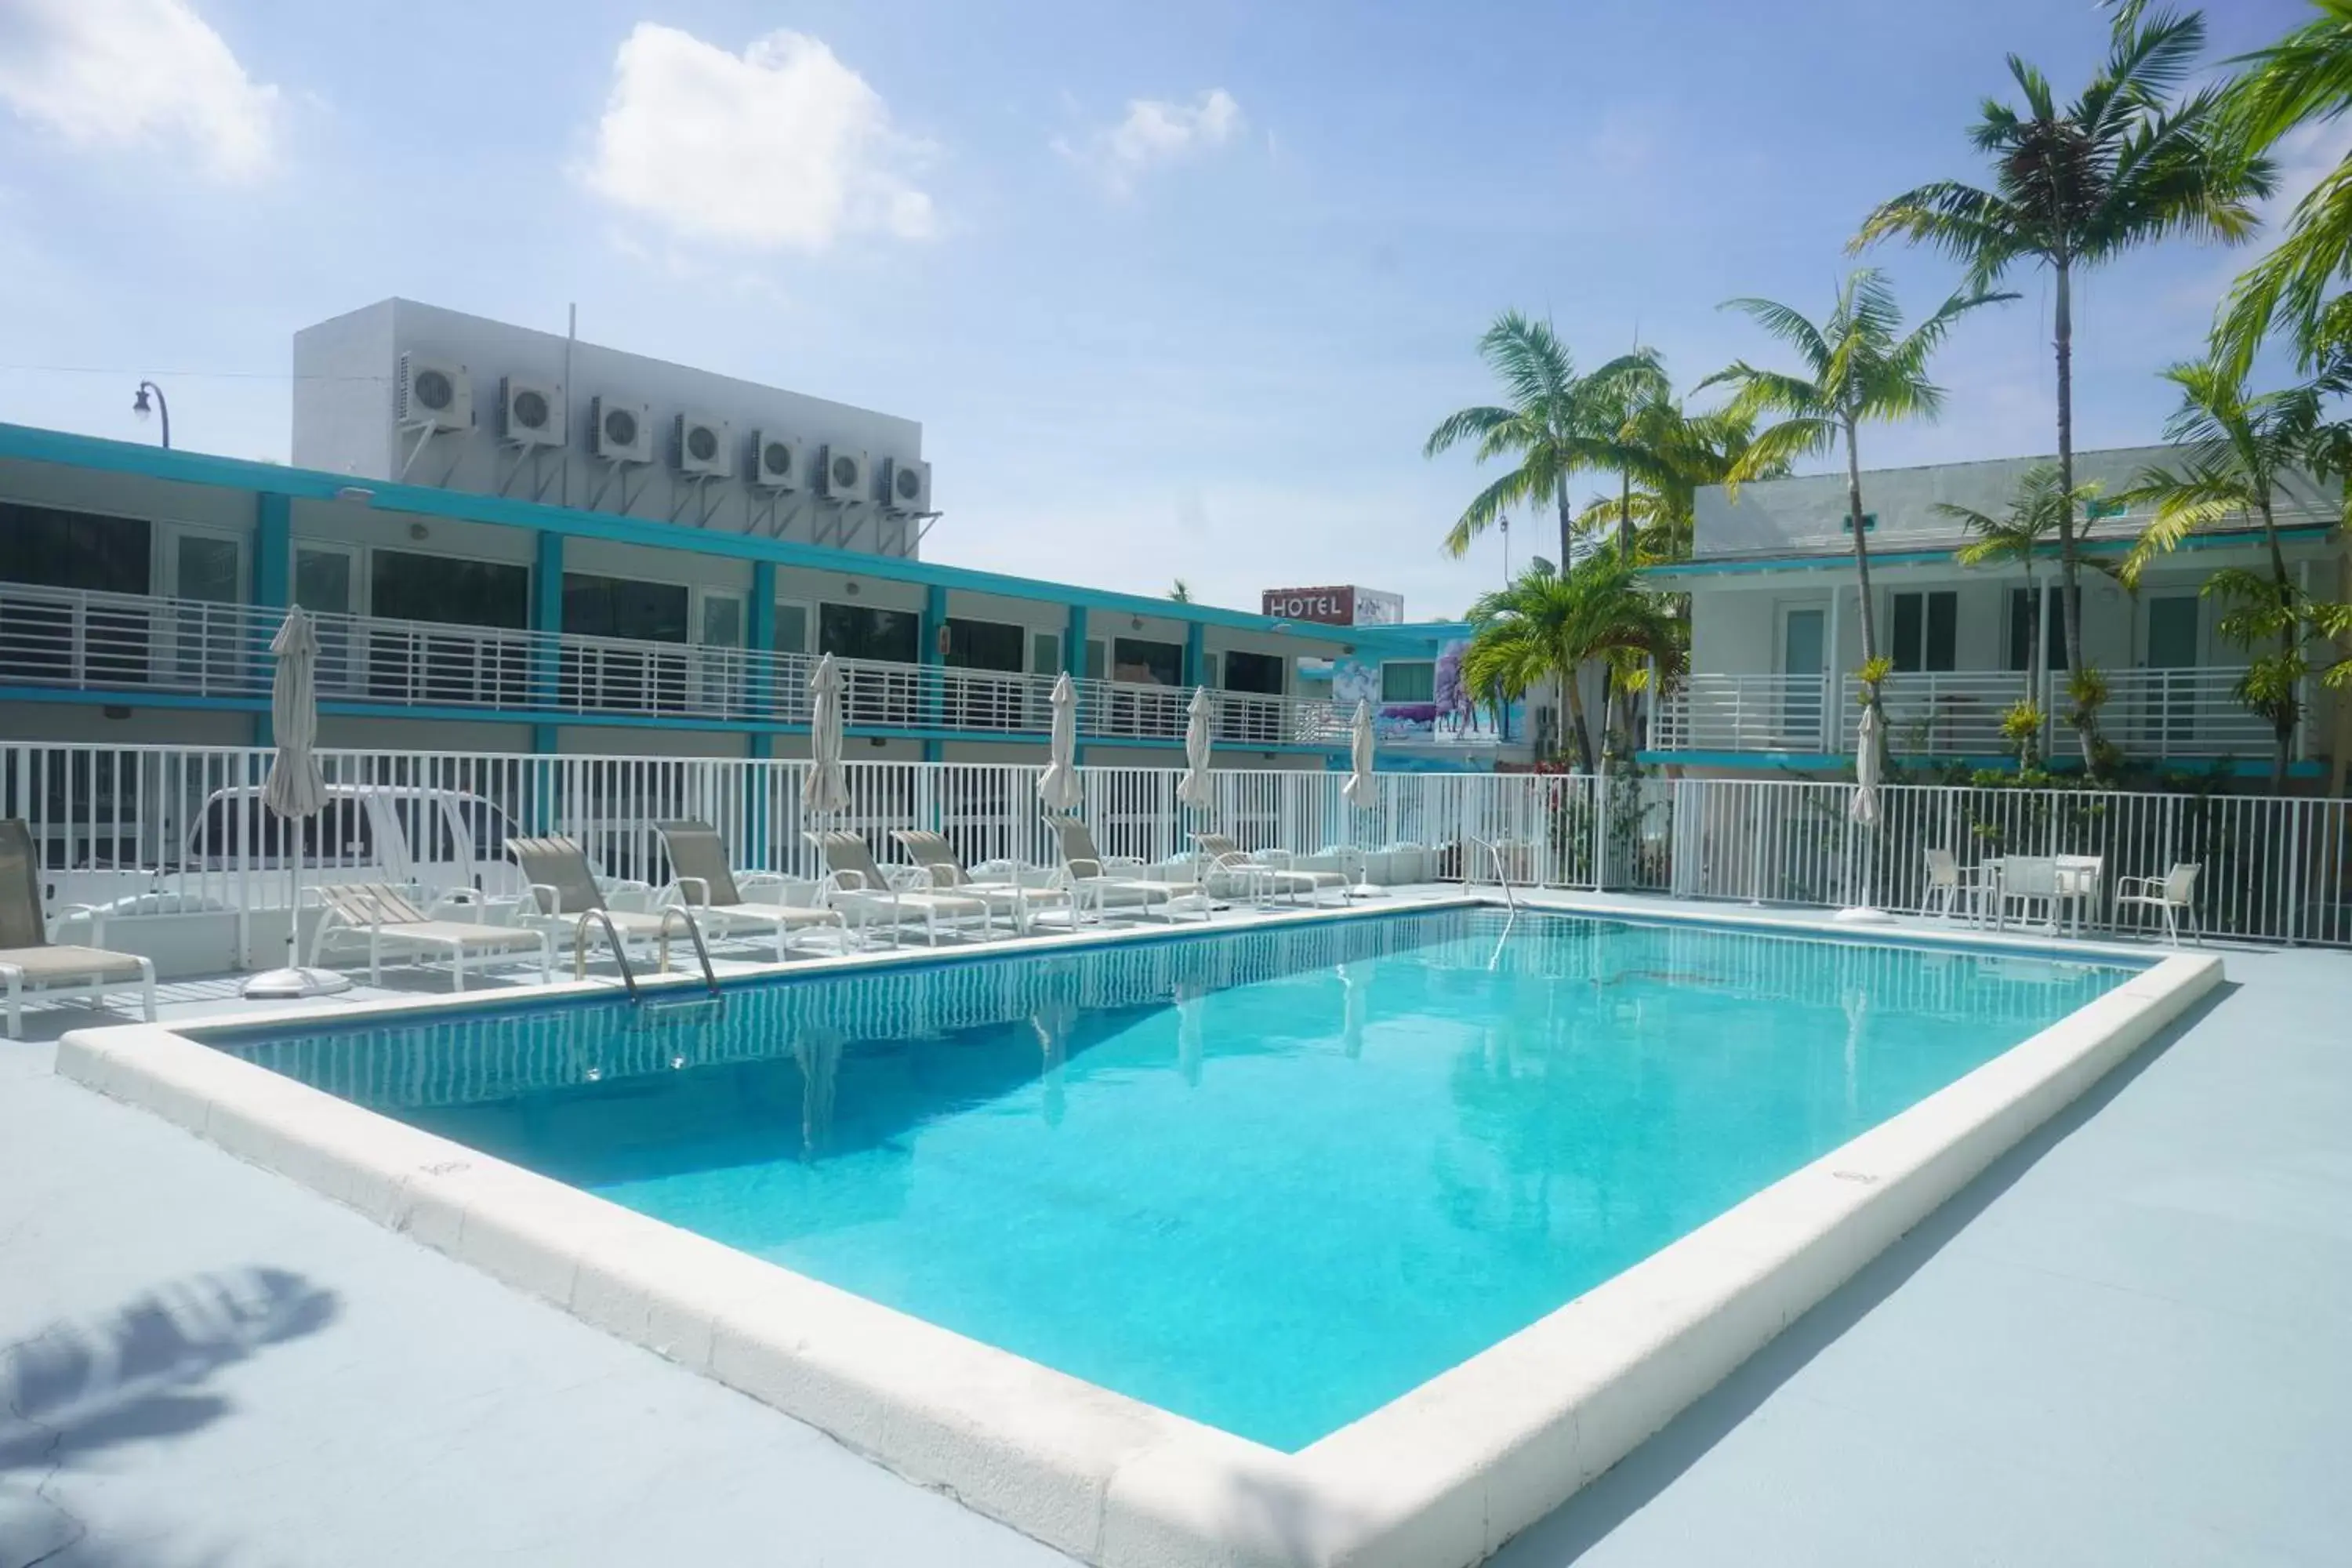 Swimming Pool in The New Yorker Miami Hotel